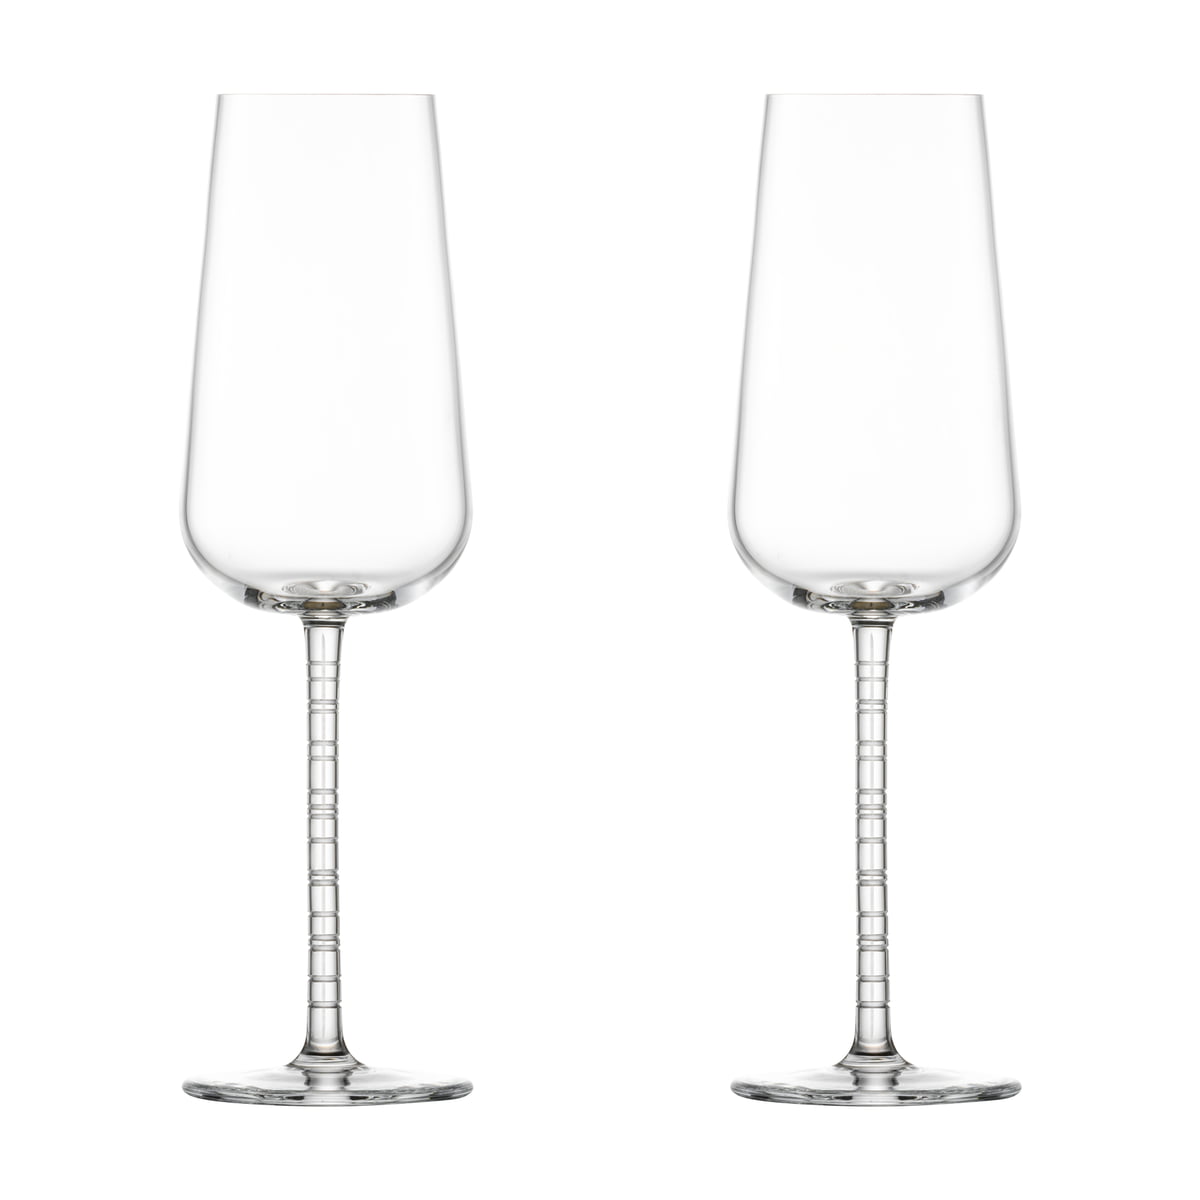 Zwiesel Glas Highness Champagne Flutes, Set of 2